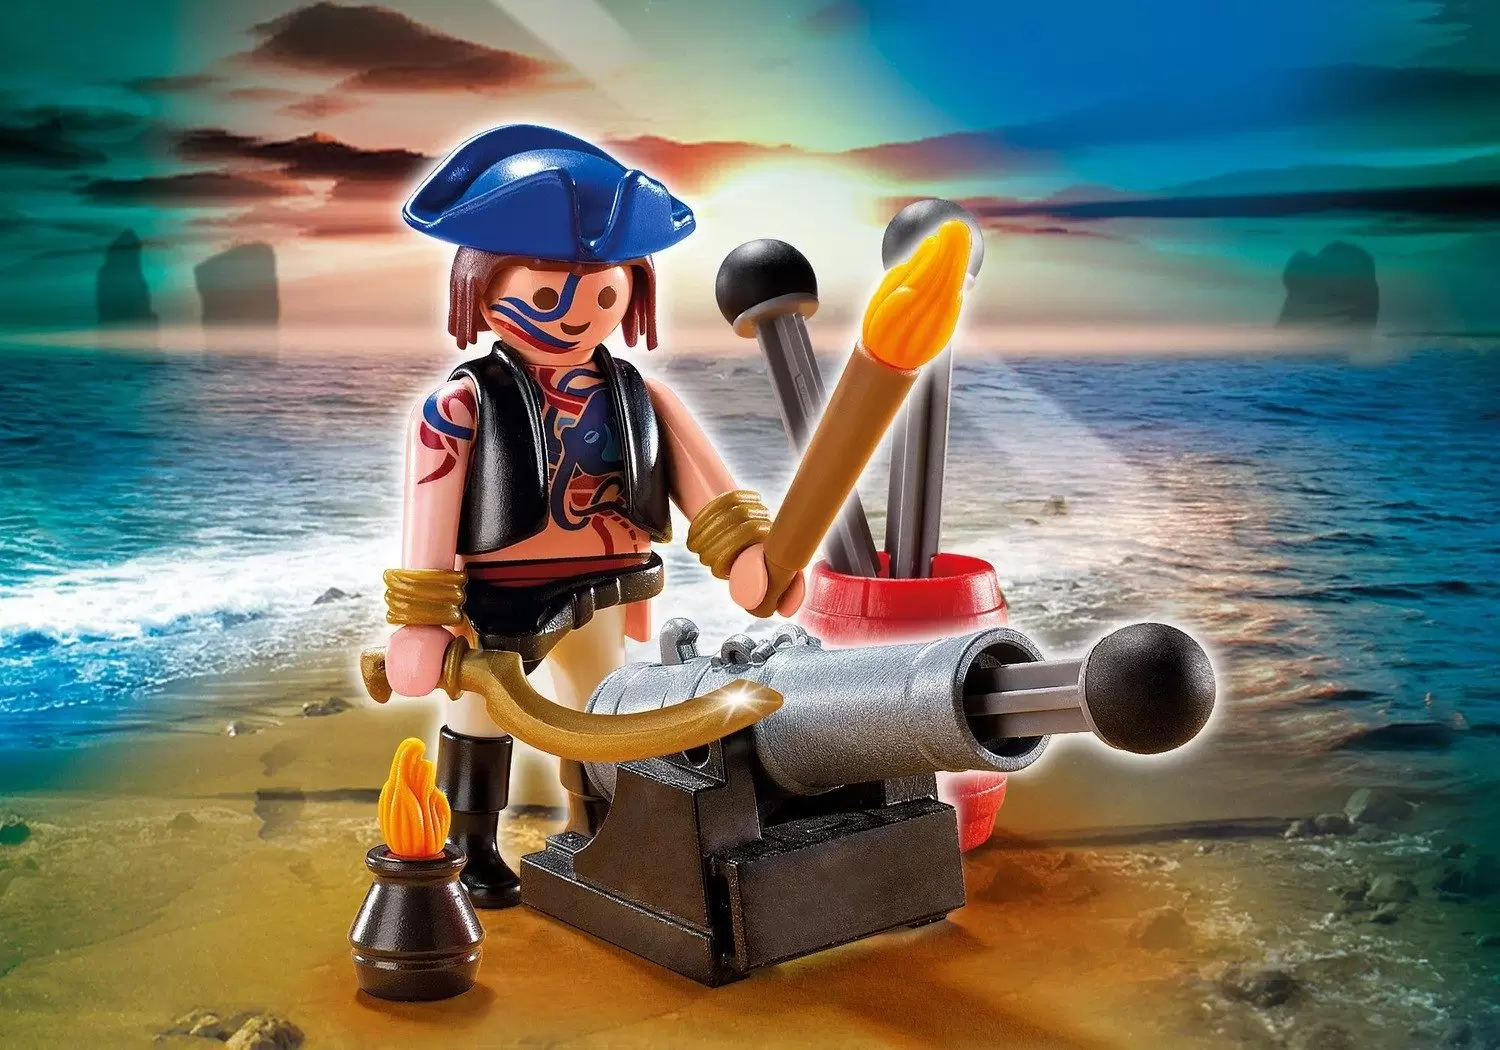 Playmobil SpecialPlus - Pirate attack with cannon